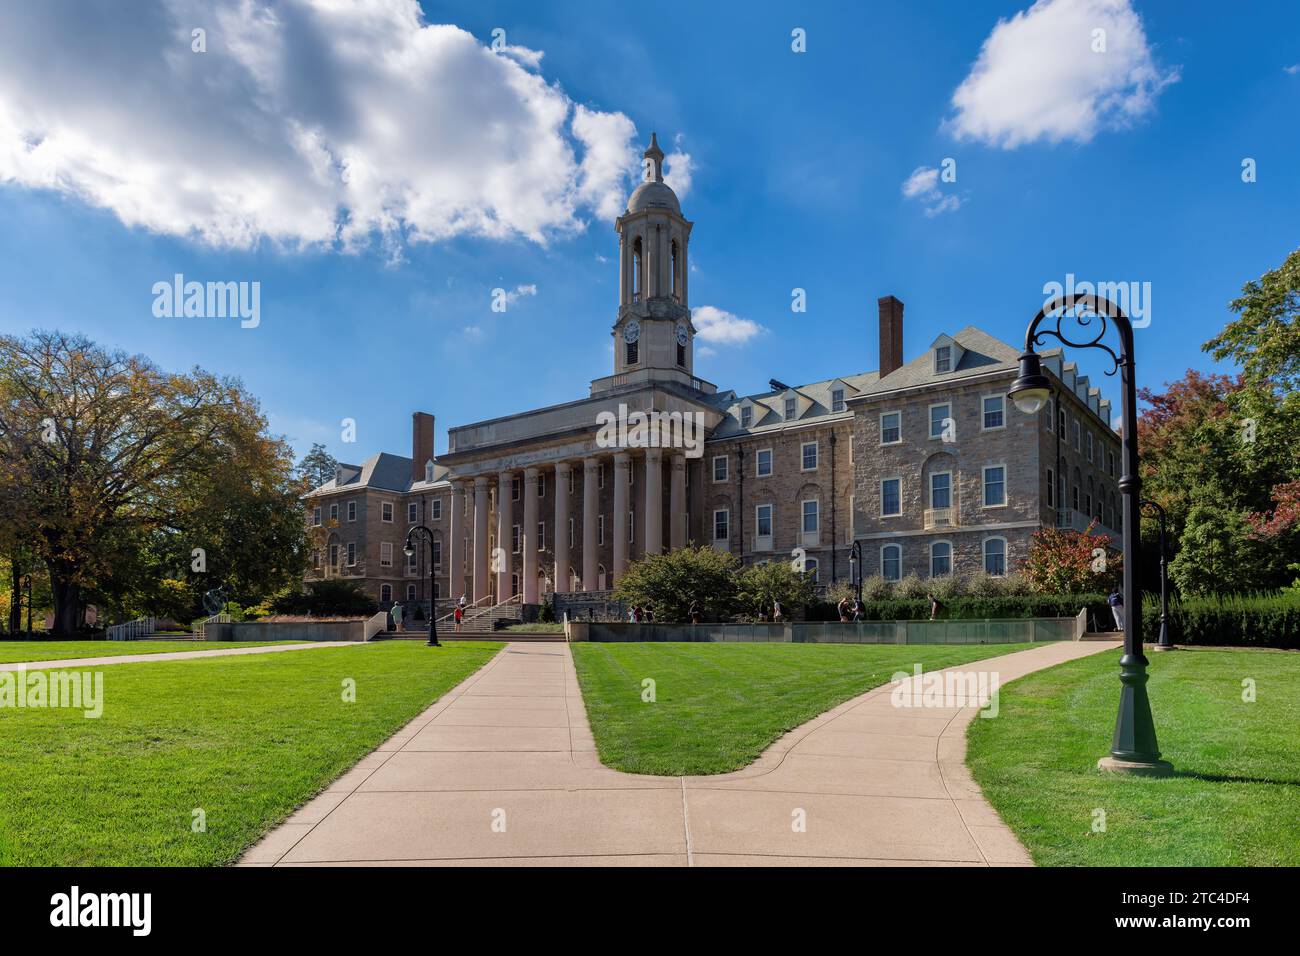 The Old Main building on the campus of Penn State University in sunny day Stock Photo